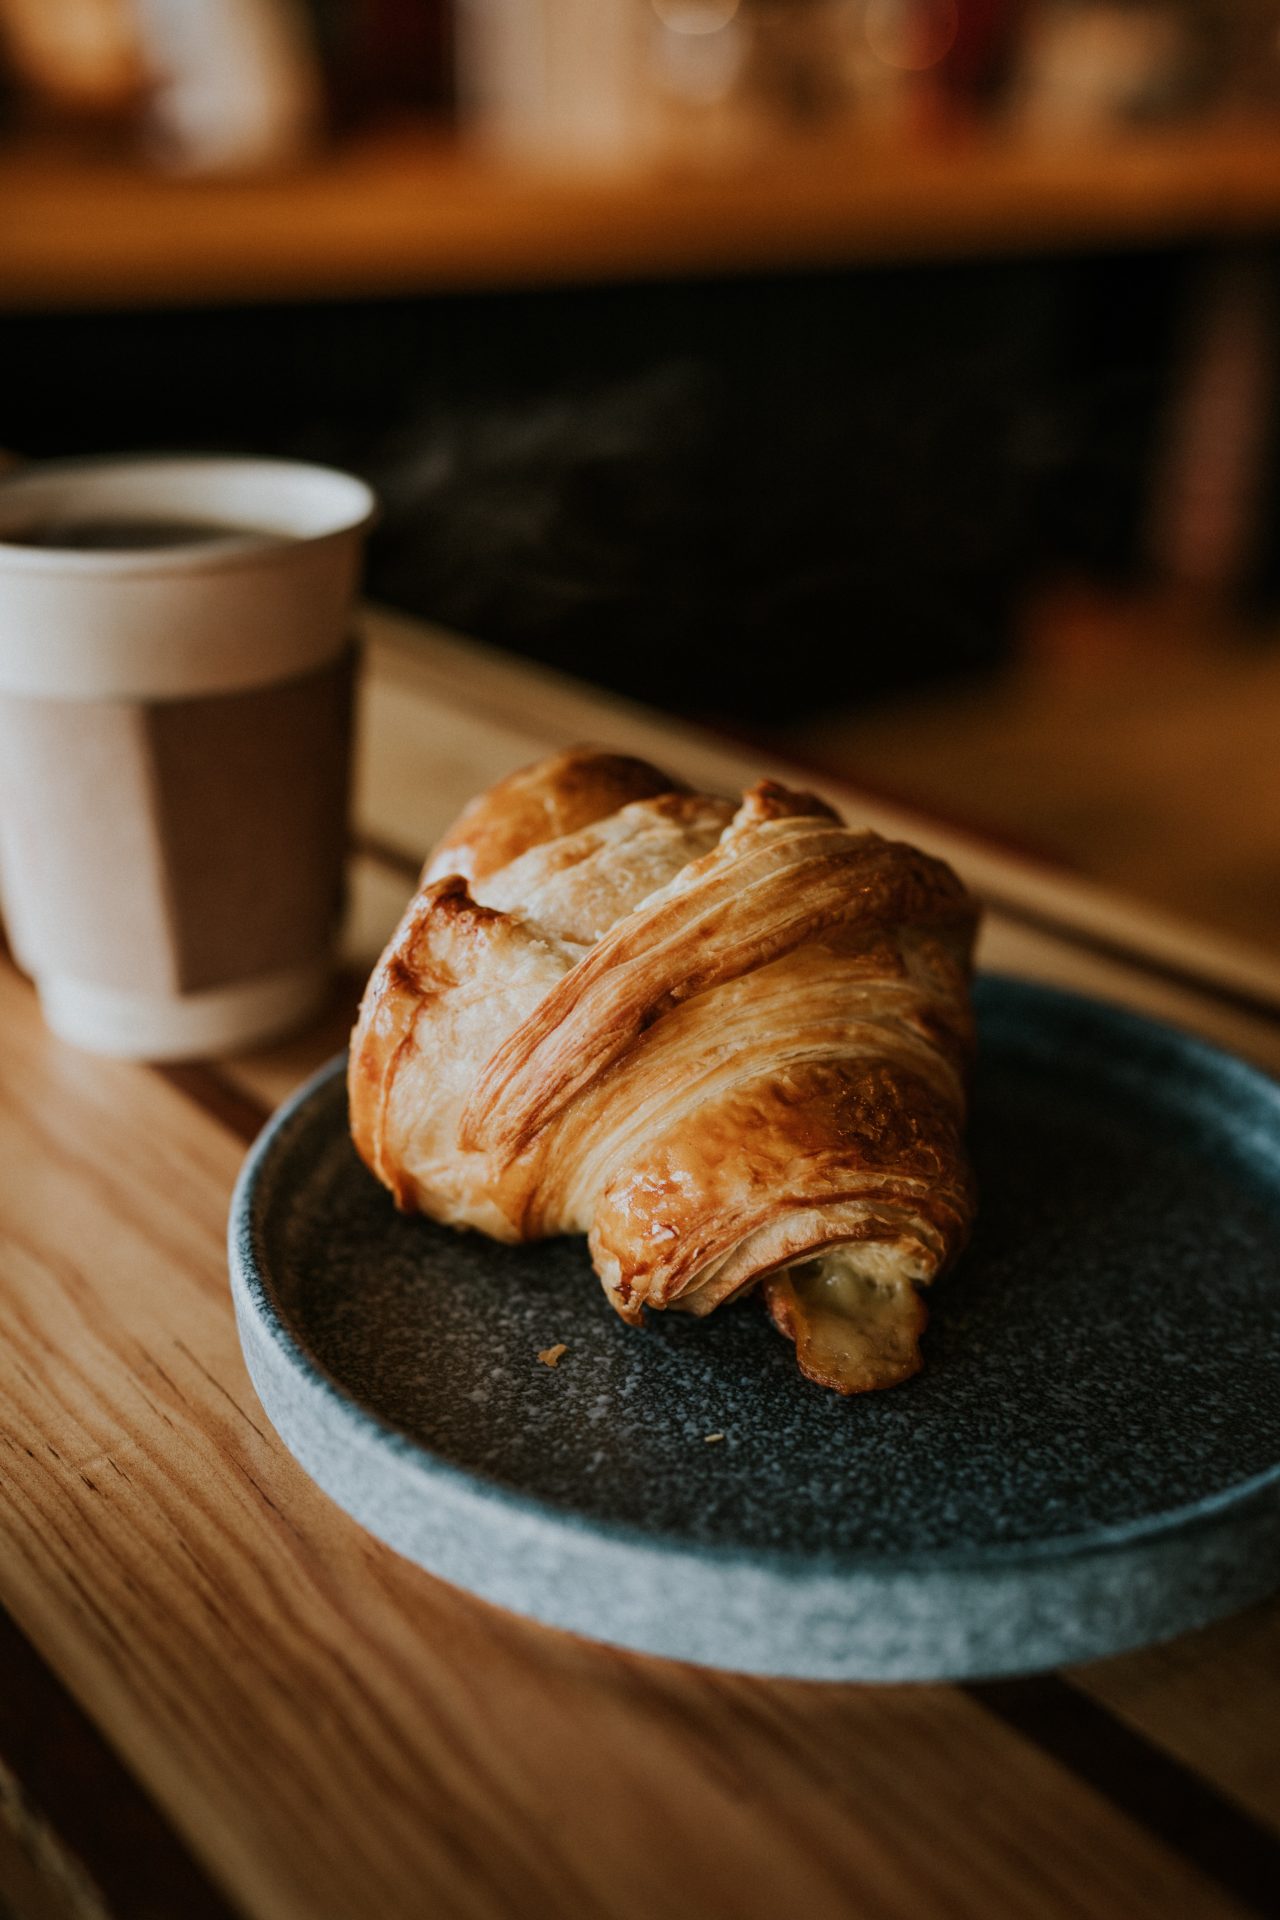 The Croissant: A Delicious French Pastry with an Etymological History